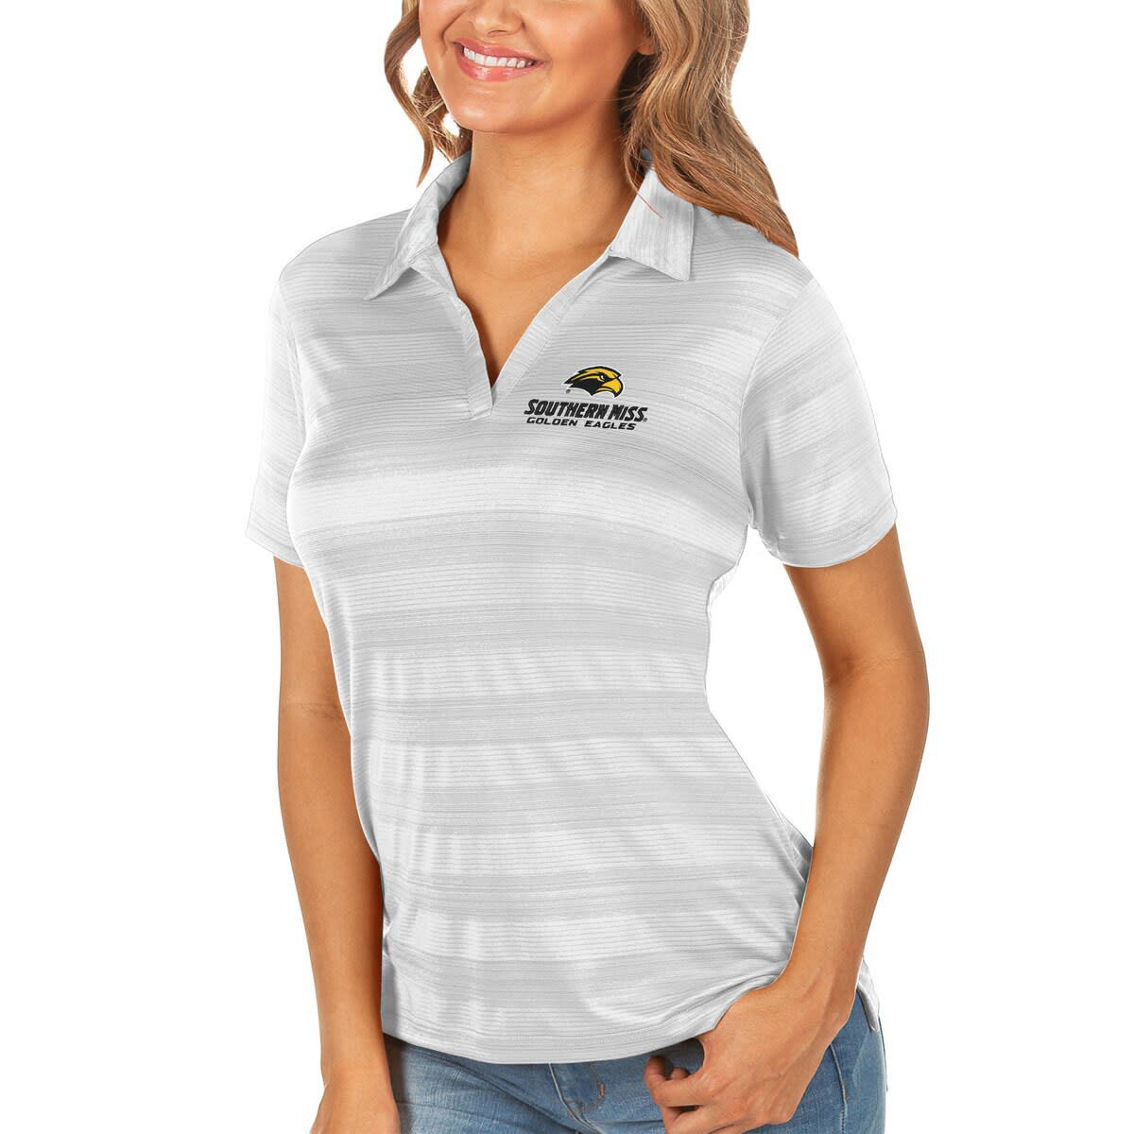 Antigua Women's White Southern Miss Golden Eagles Compass Polo - Image 2 of 2